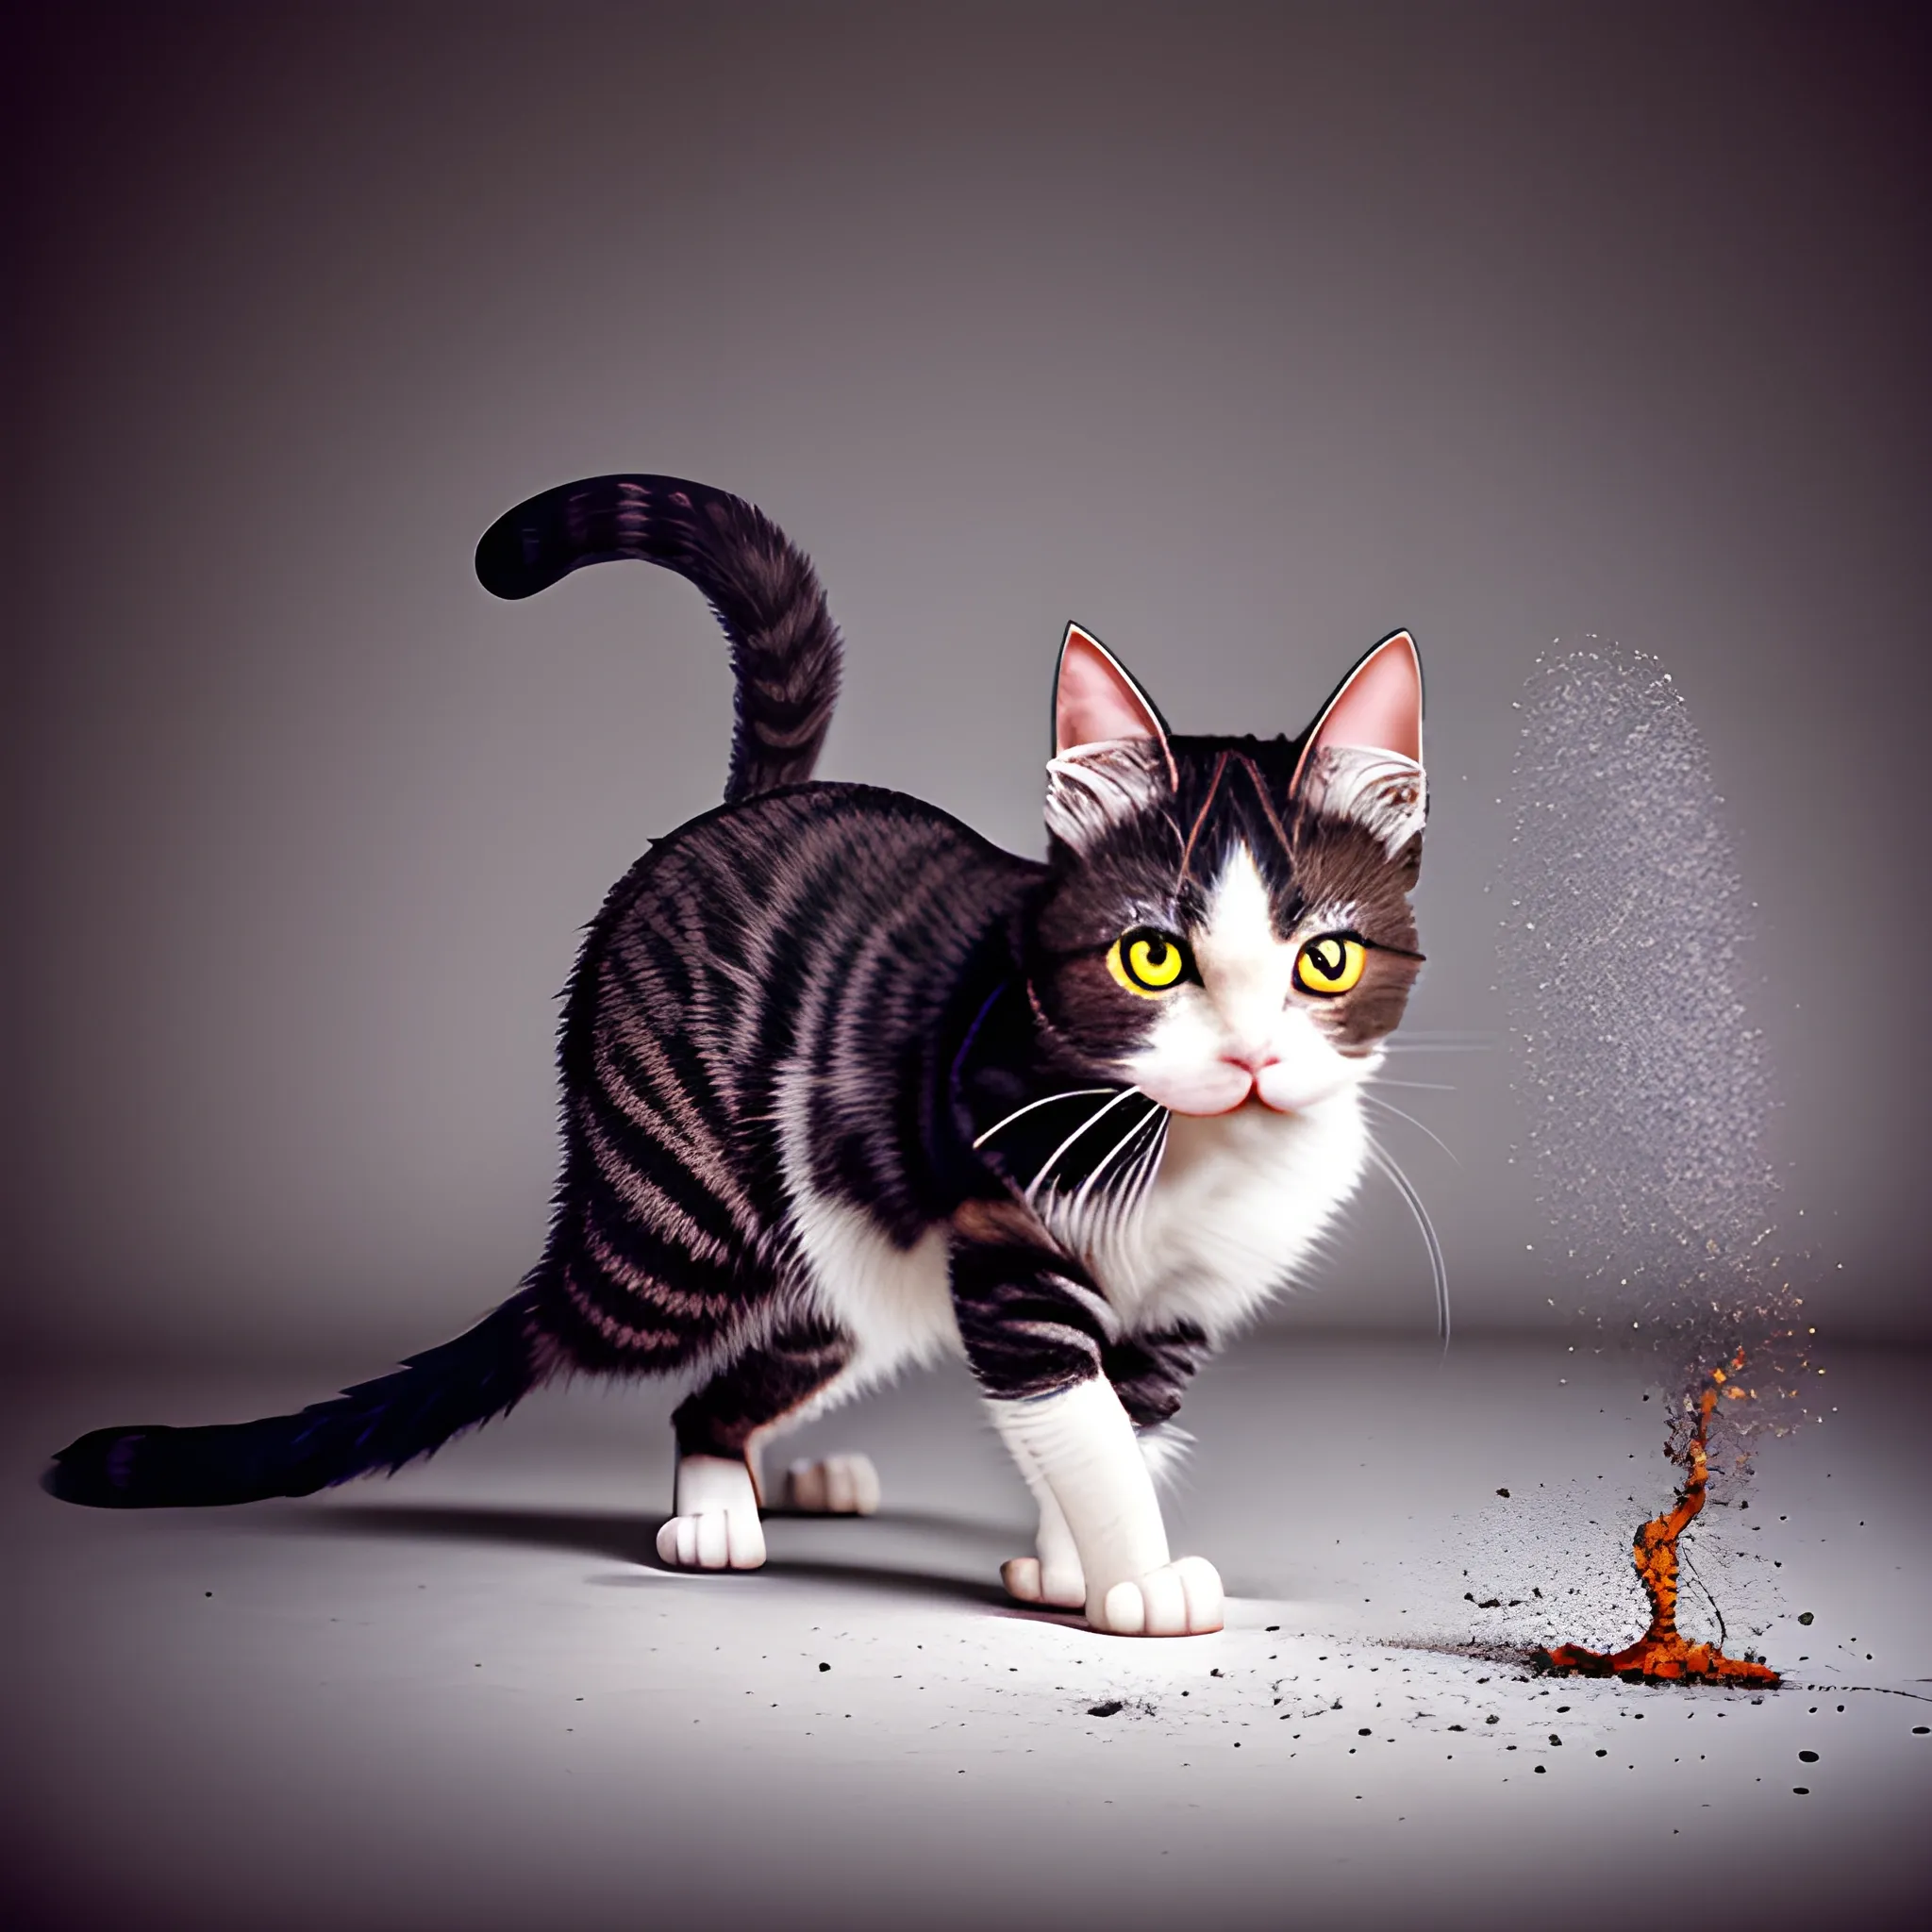 exploded cat, photography